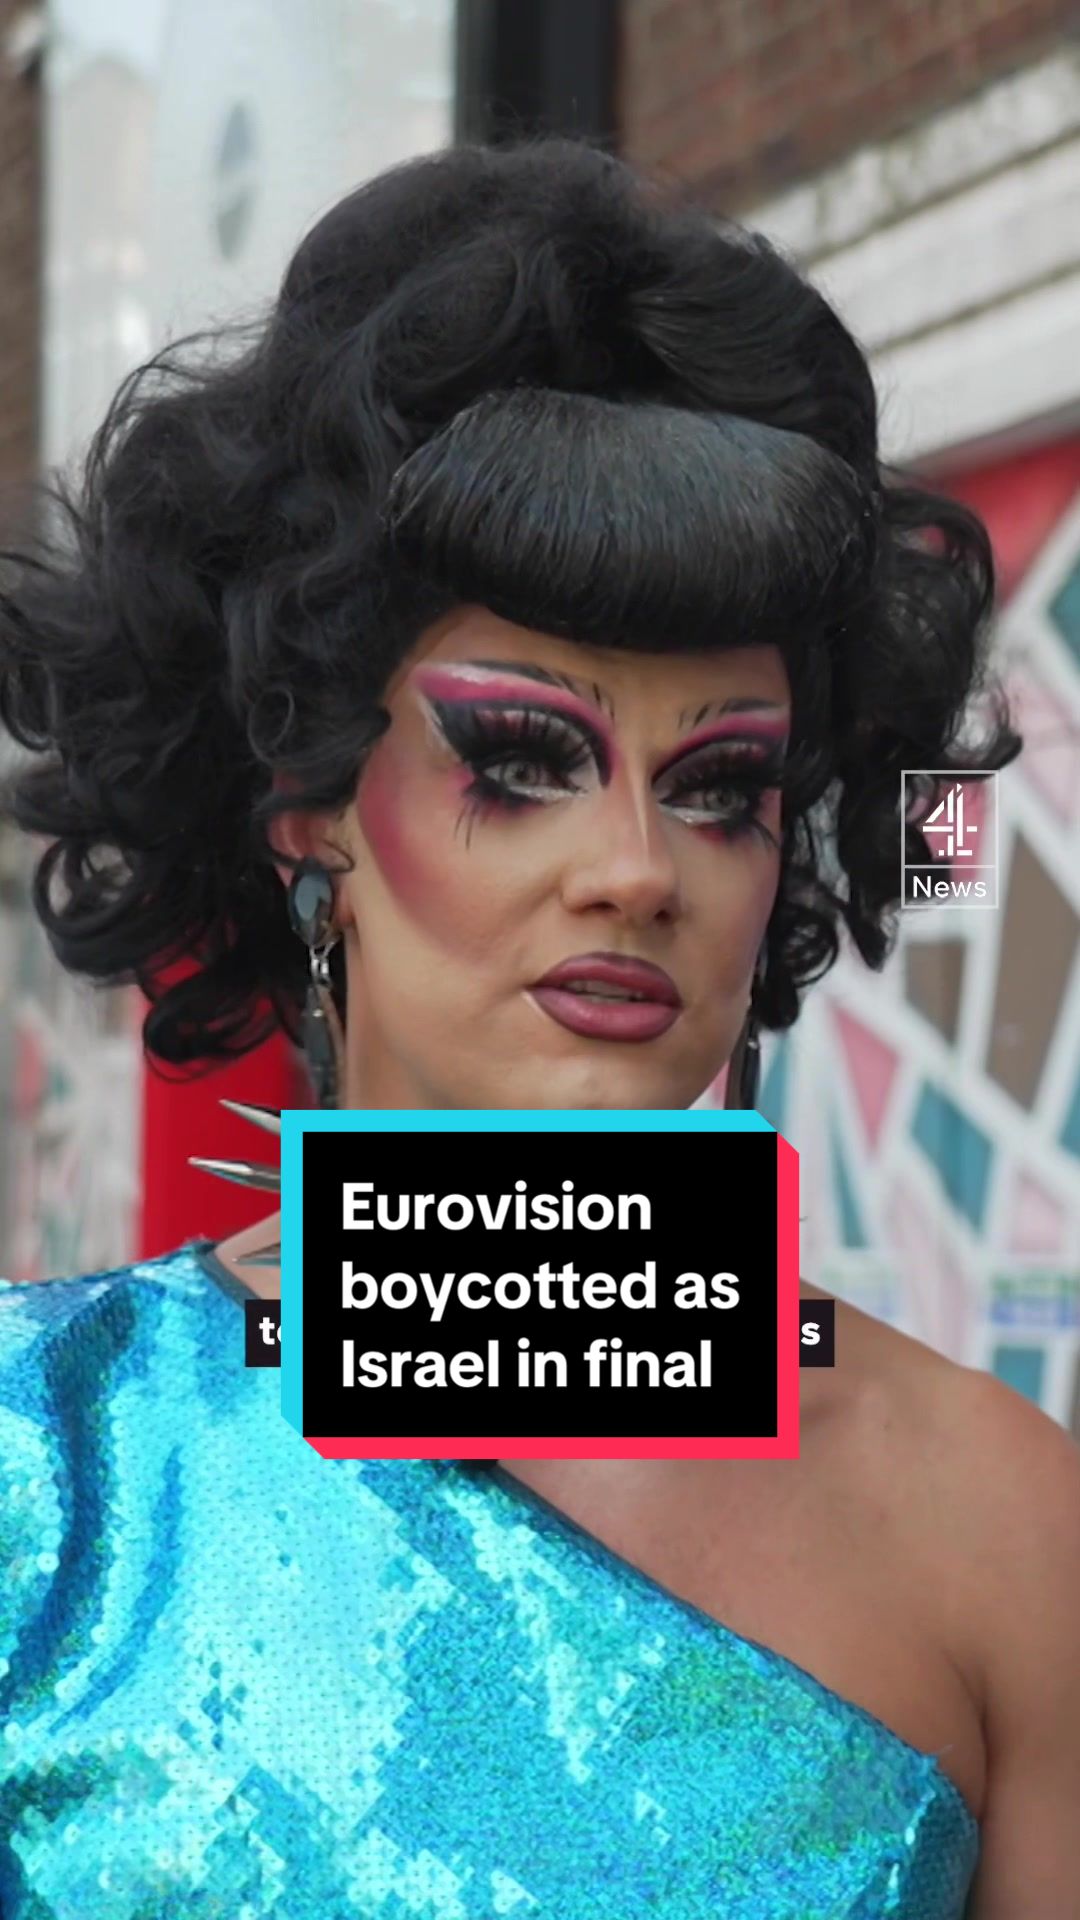 Israel's placement in this year's Eurovision final has incensed many previously-devoted viewers like drag queen Crystal, who has cancelled an 800 person party in London. #News #Channel4News #C4News #Eurovision #Drag #London #Israel #Gaza #Palestine